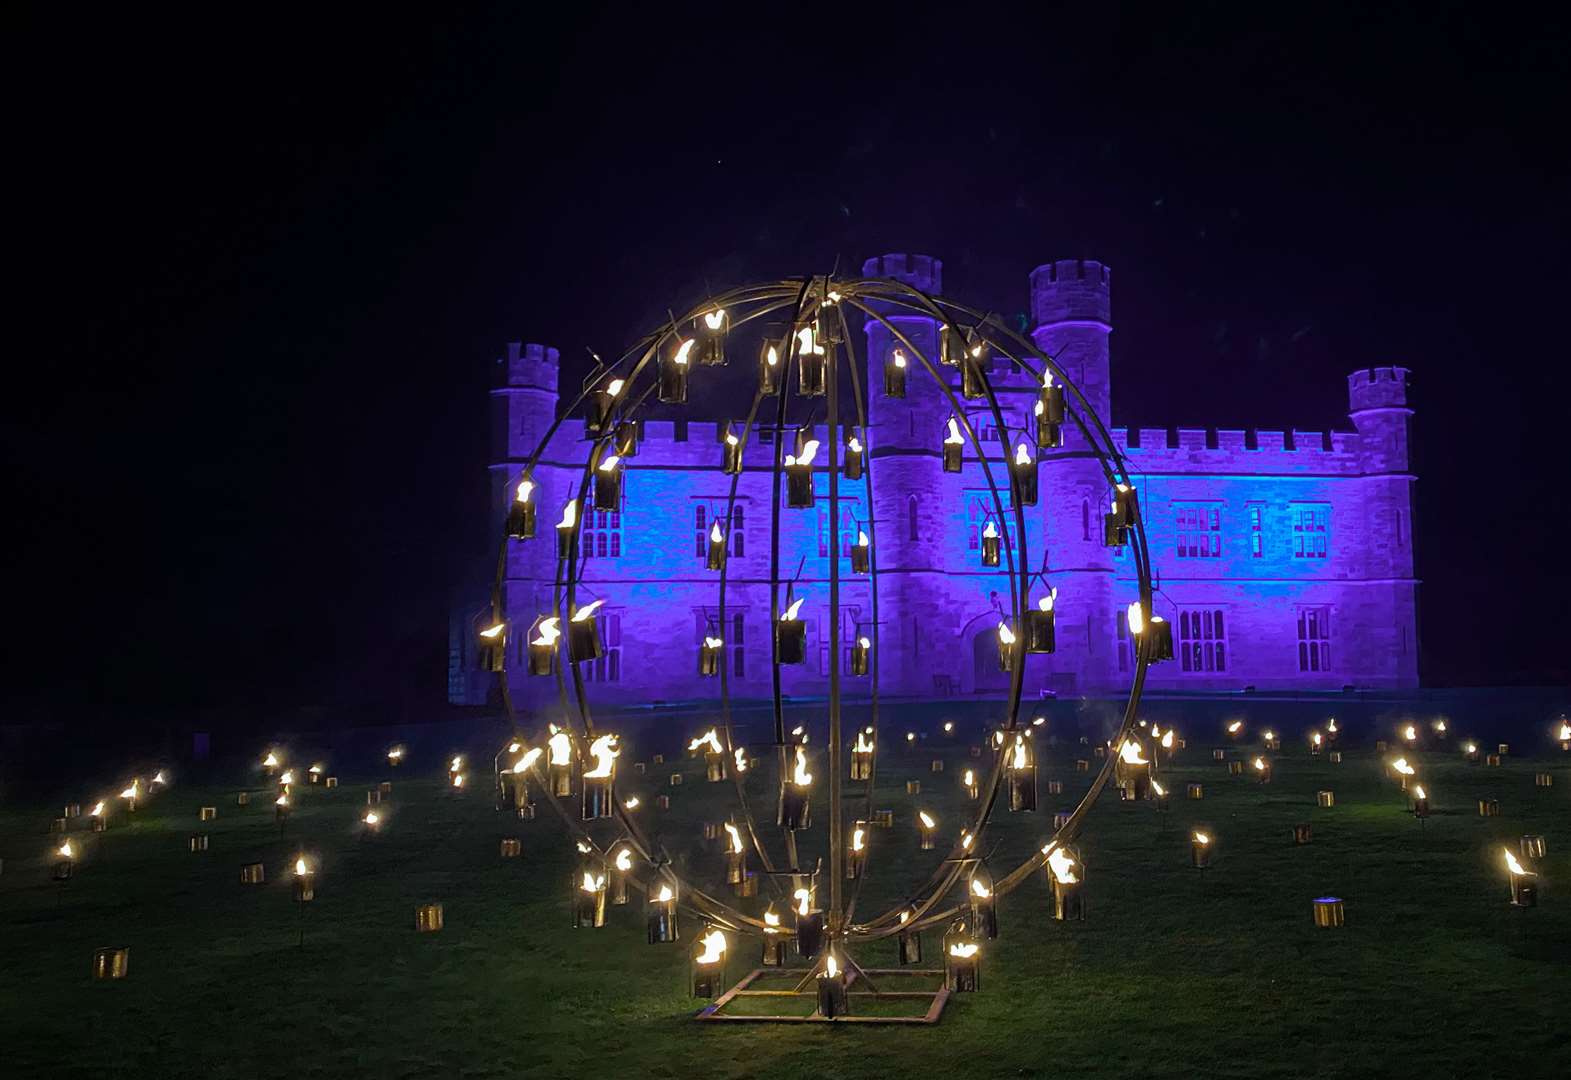 Leeds Castle's lights event reopened to the public on Tuesday